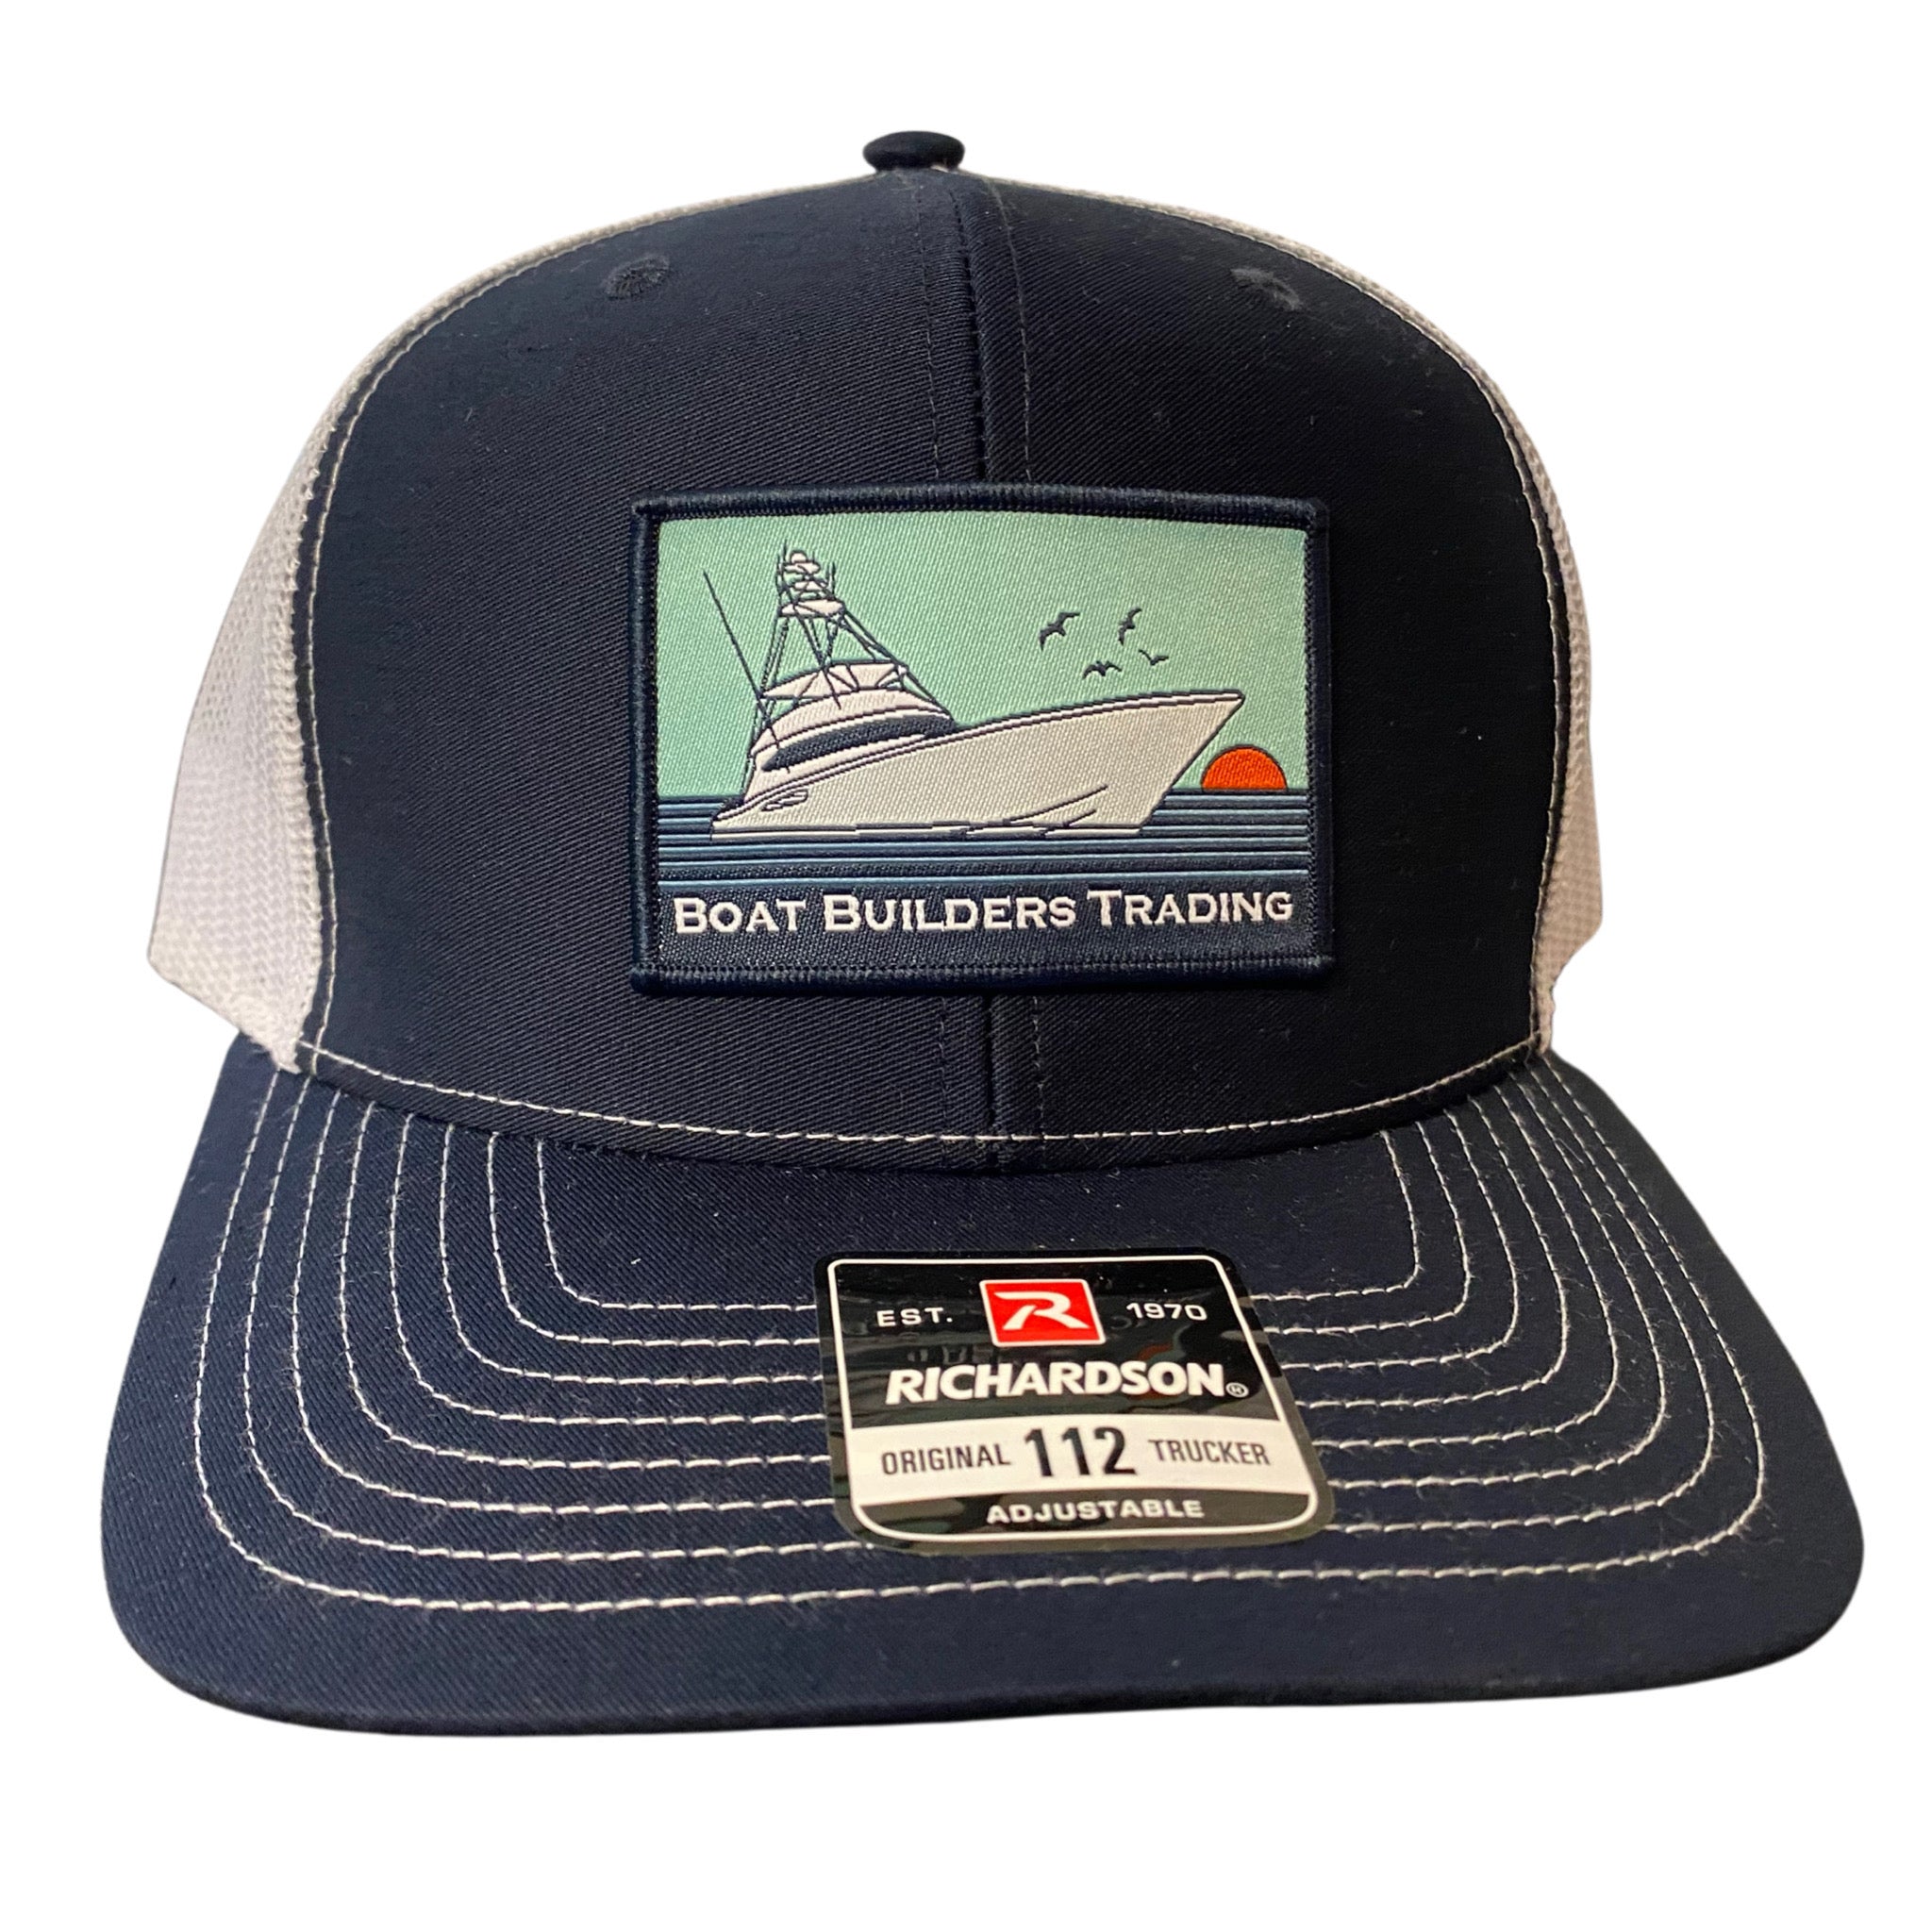 Boat Builders Trading Co Structured Trucker Hat - Limited Edition Sunrise Patch